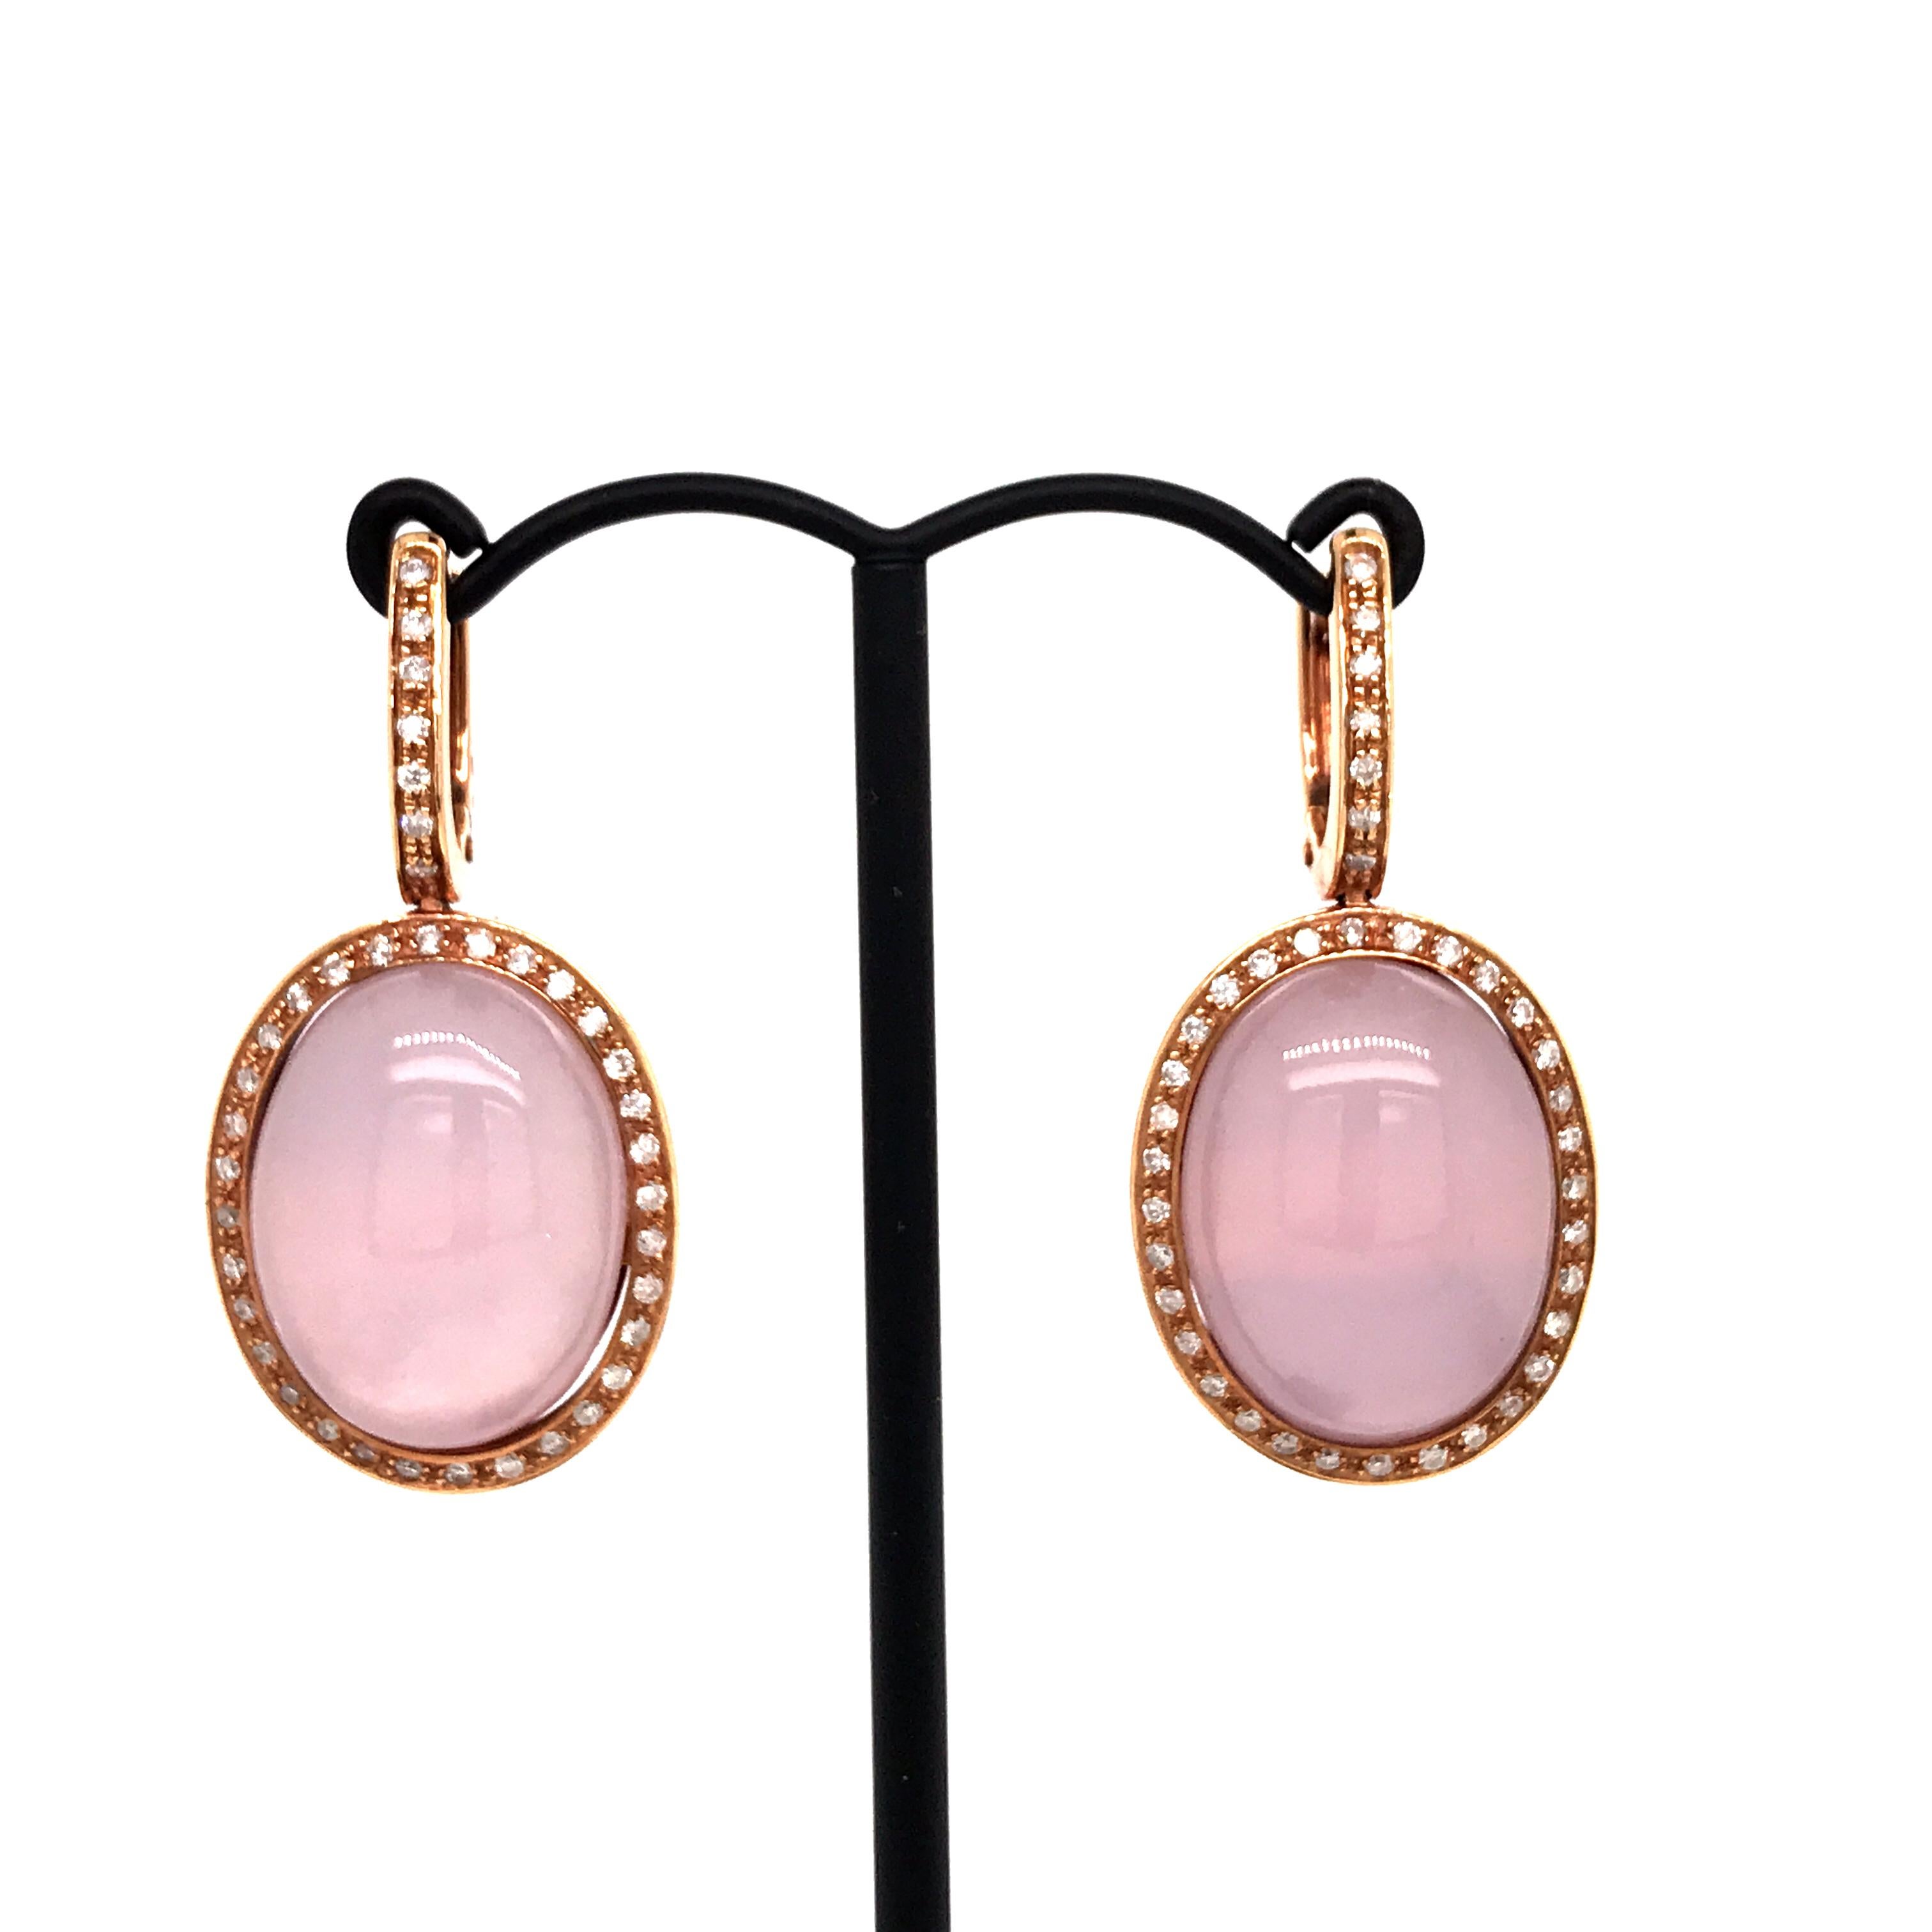 Opt for the timeless elegance of these magnificent rose gold earrings, enhanced by sparkling diamonds and a vintage touch with bakelite. With 80 sparkling diamonds totalling an impressive 1.08 carats, these earrings will add sophistication and